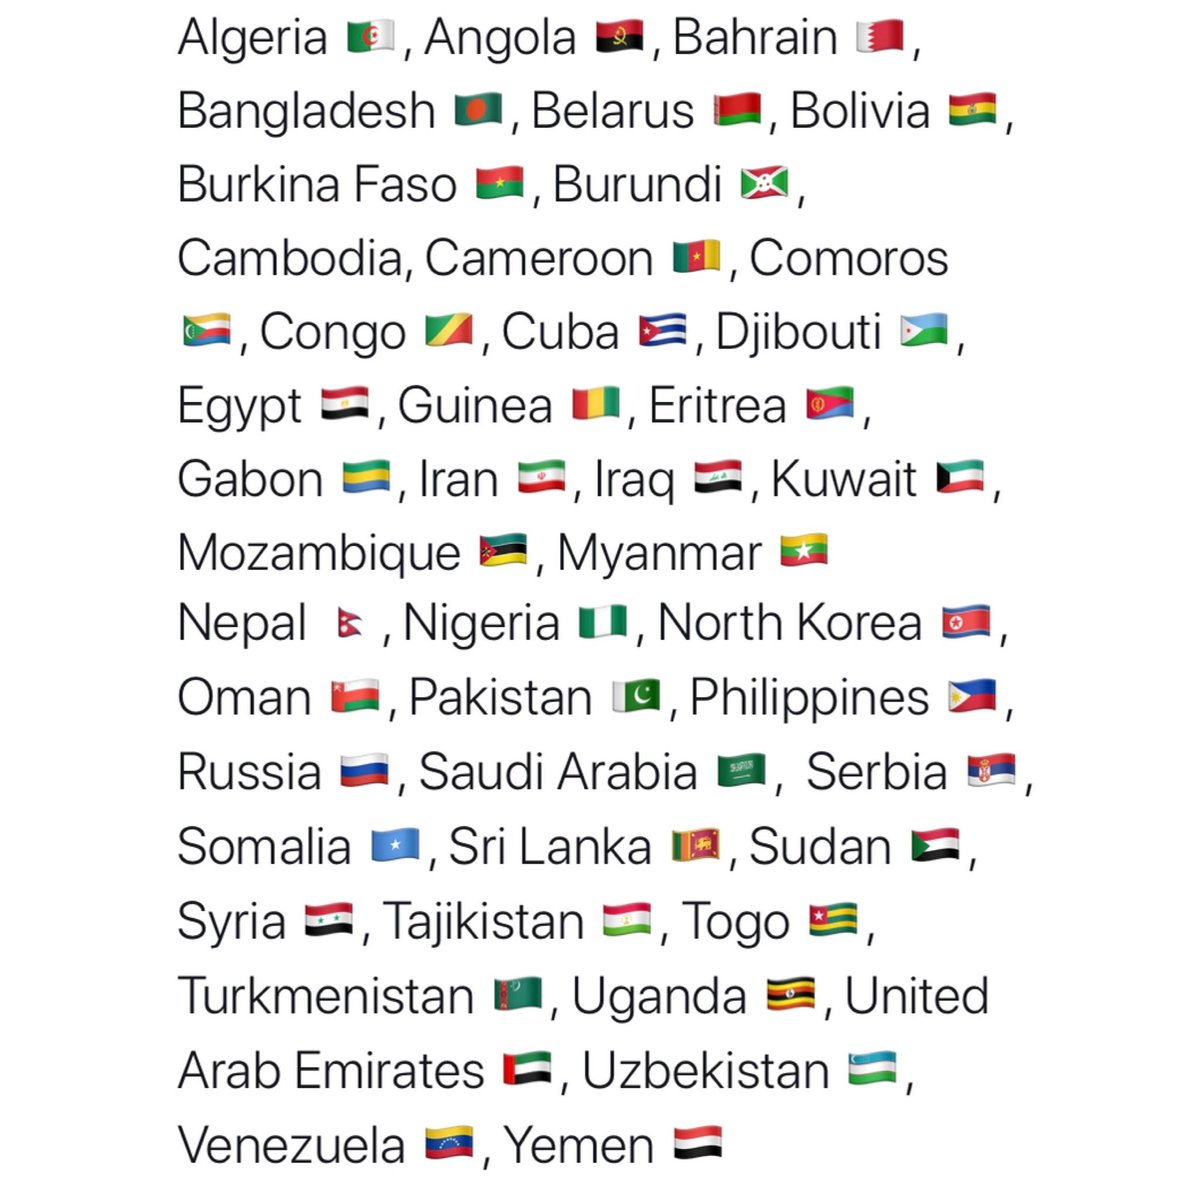 Countries that support the Xinjiang policy